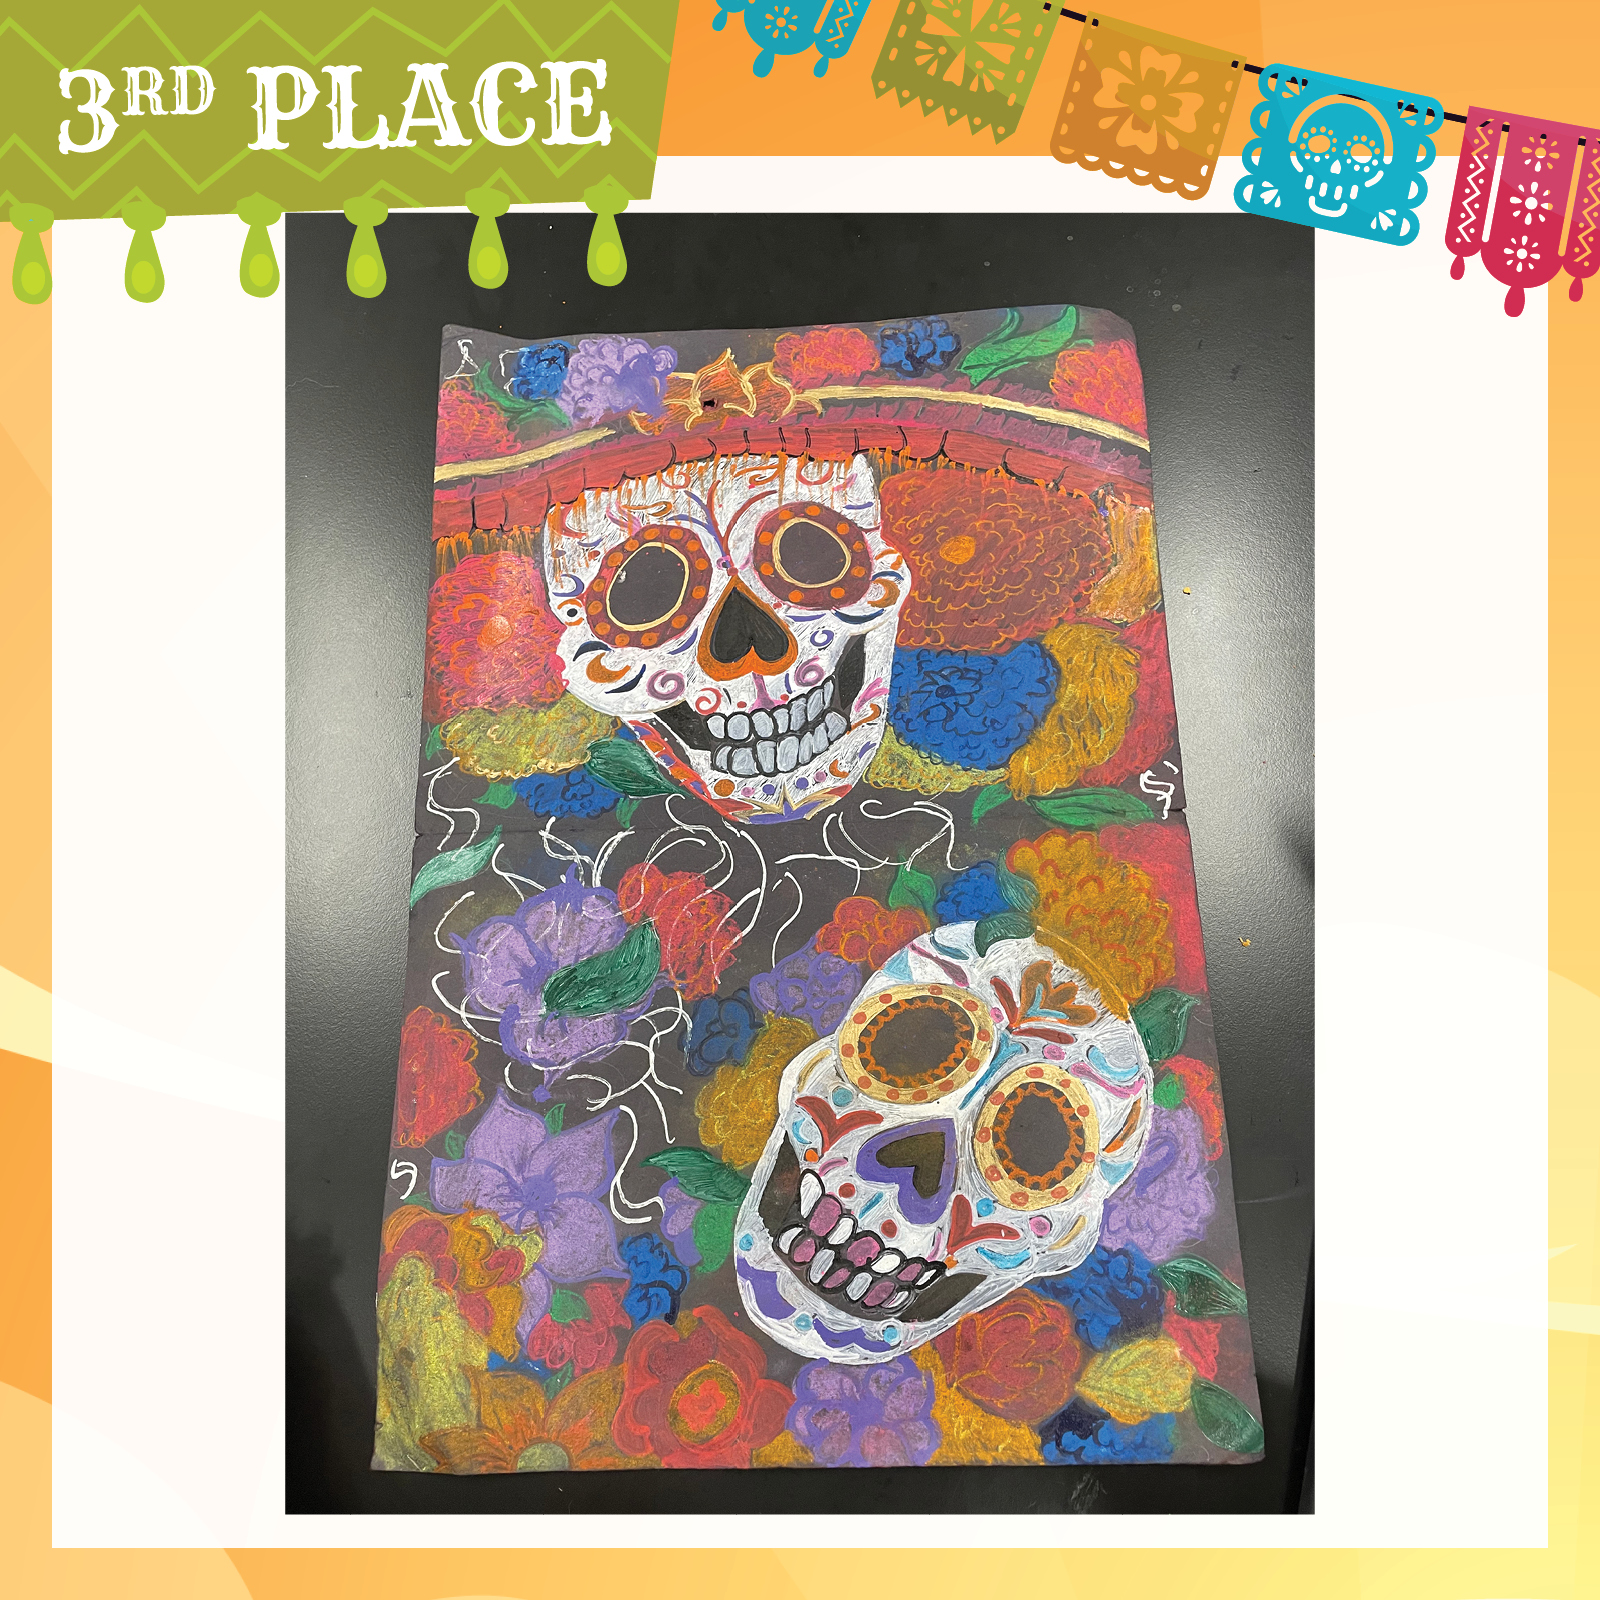 pastel drawing of two Dia de los muertos masks surrounded by festive flowers